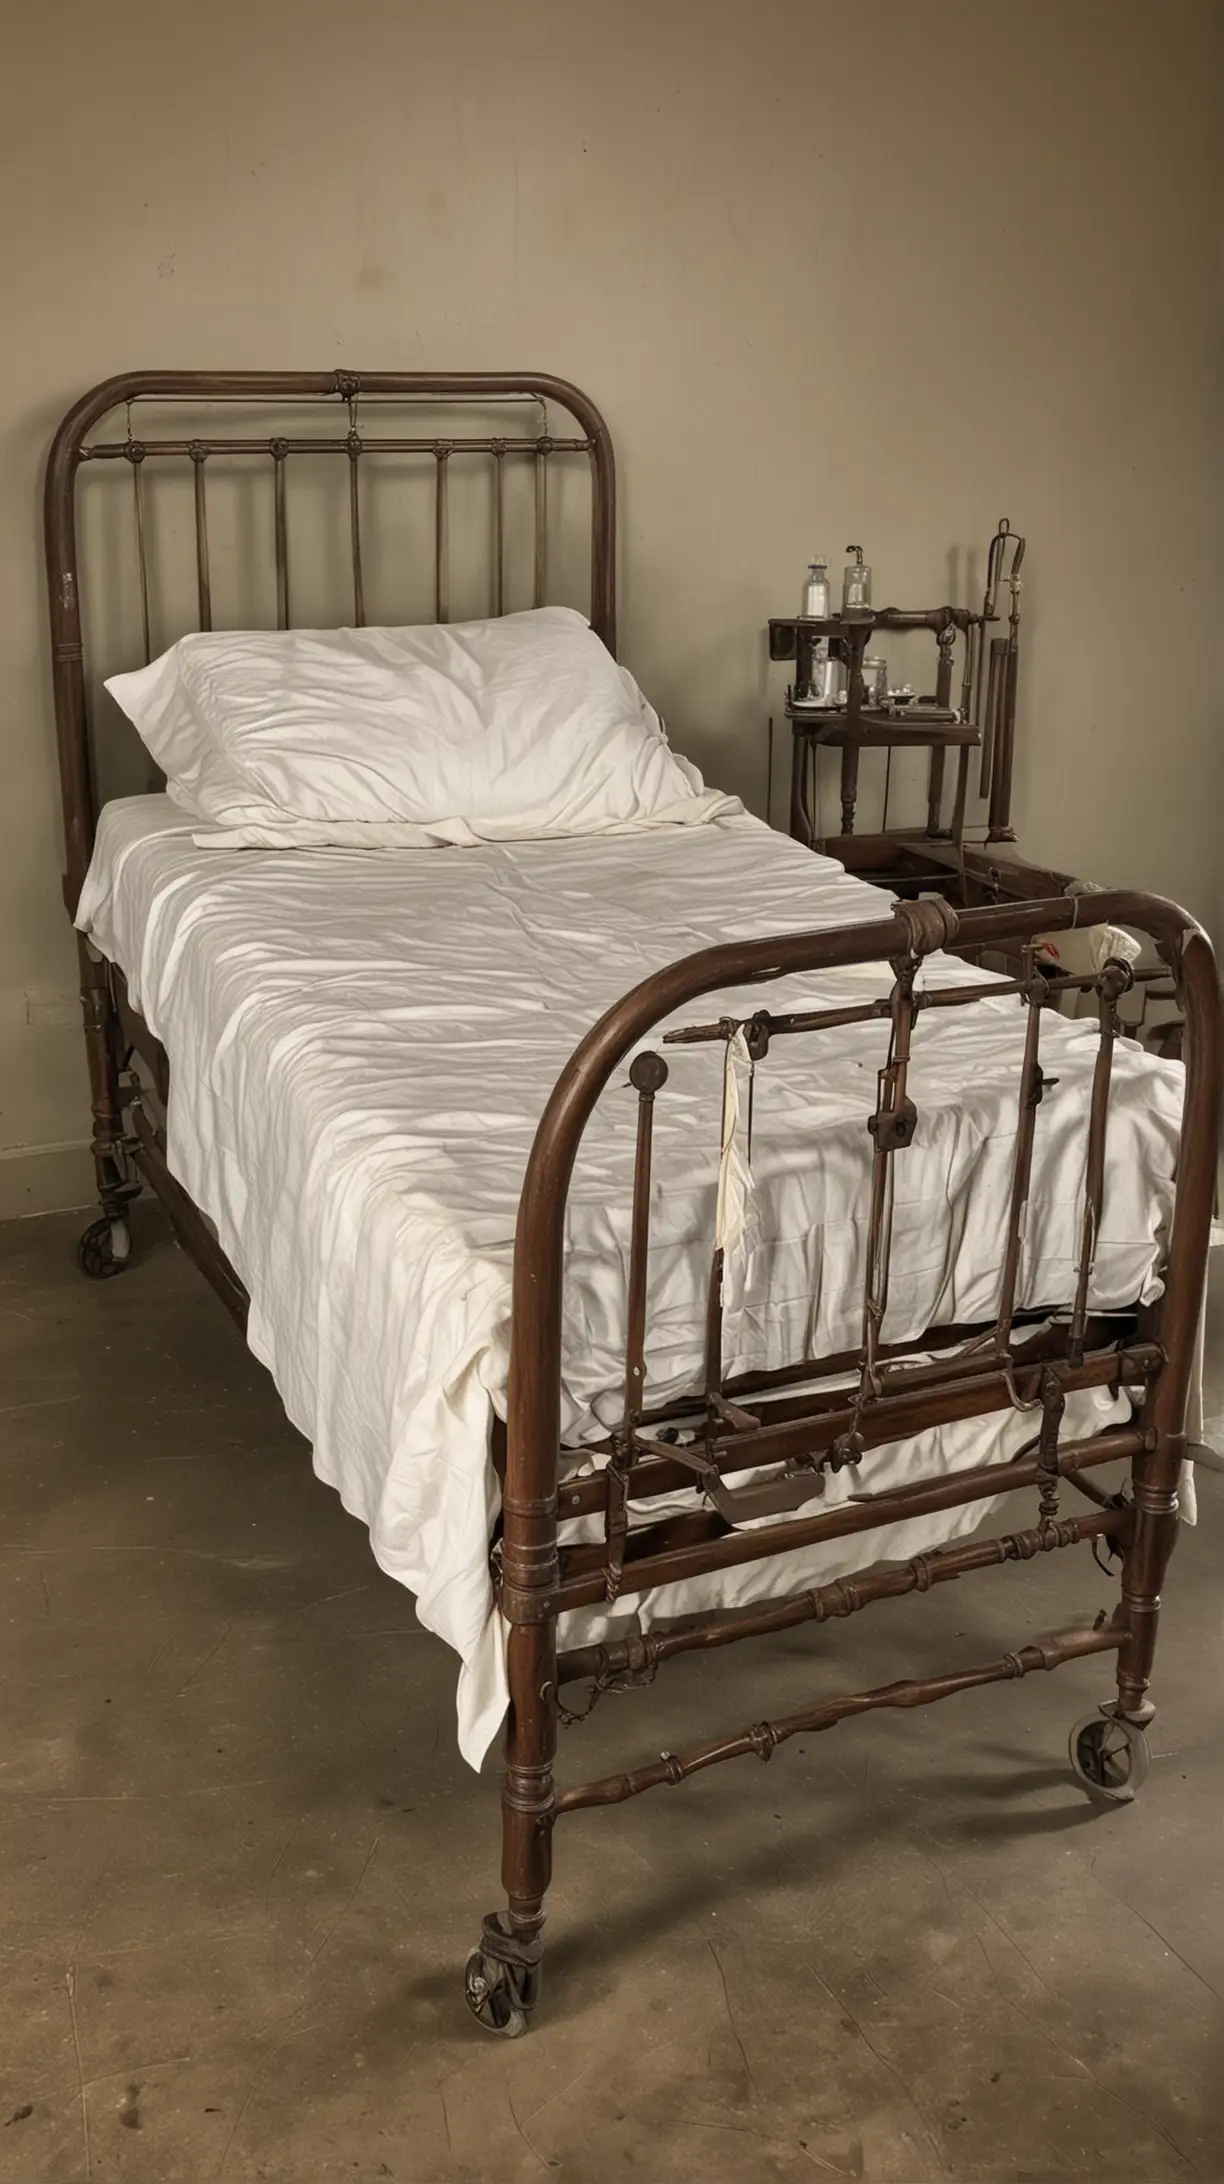 Vintage Hospital Bed from the 1800s